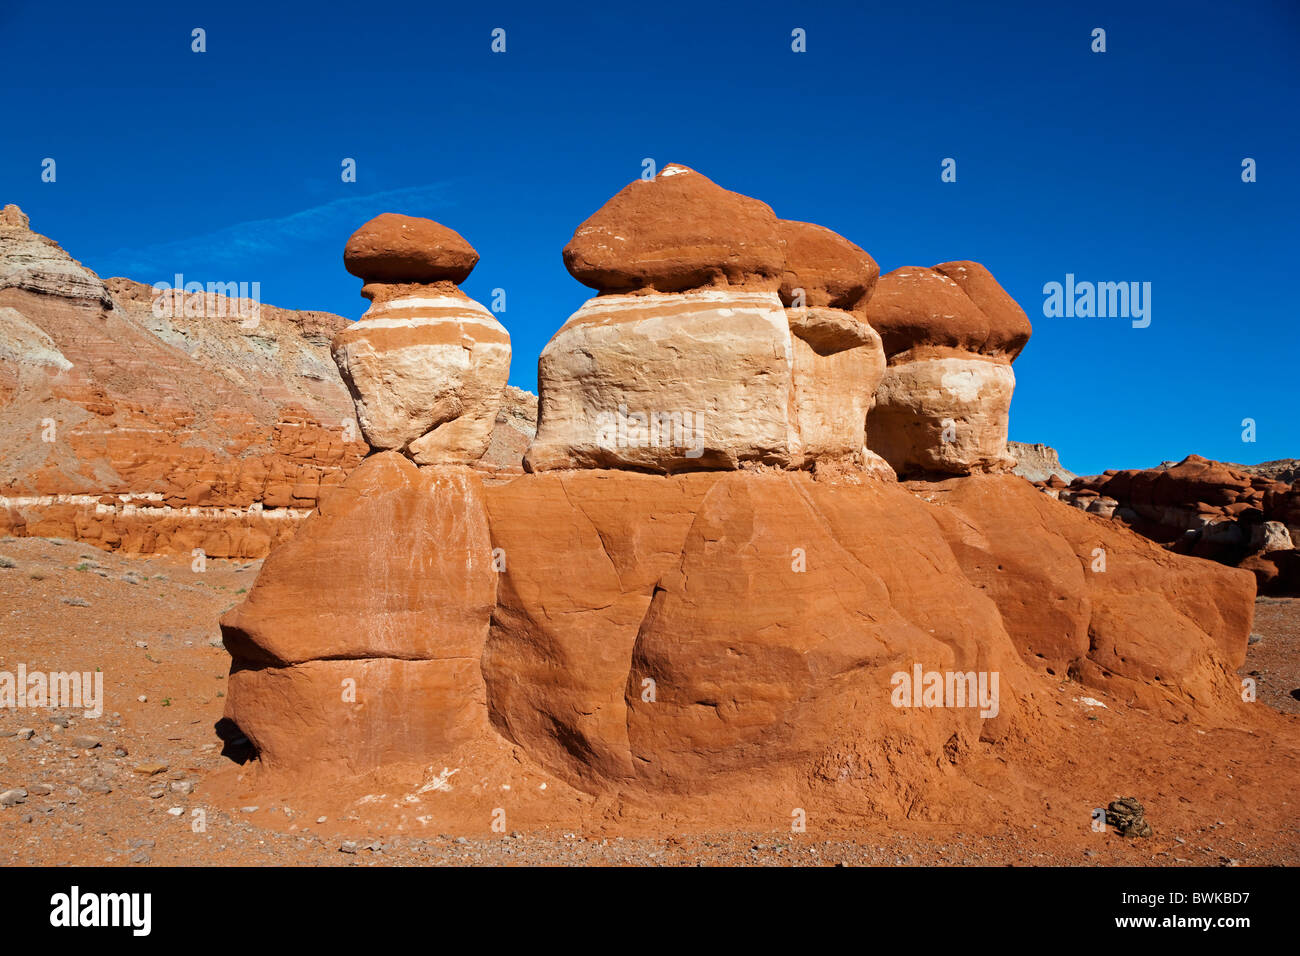 Different coloured sandstone formations, Little Egypt Geologic Site, Utah, USA Stock Photo